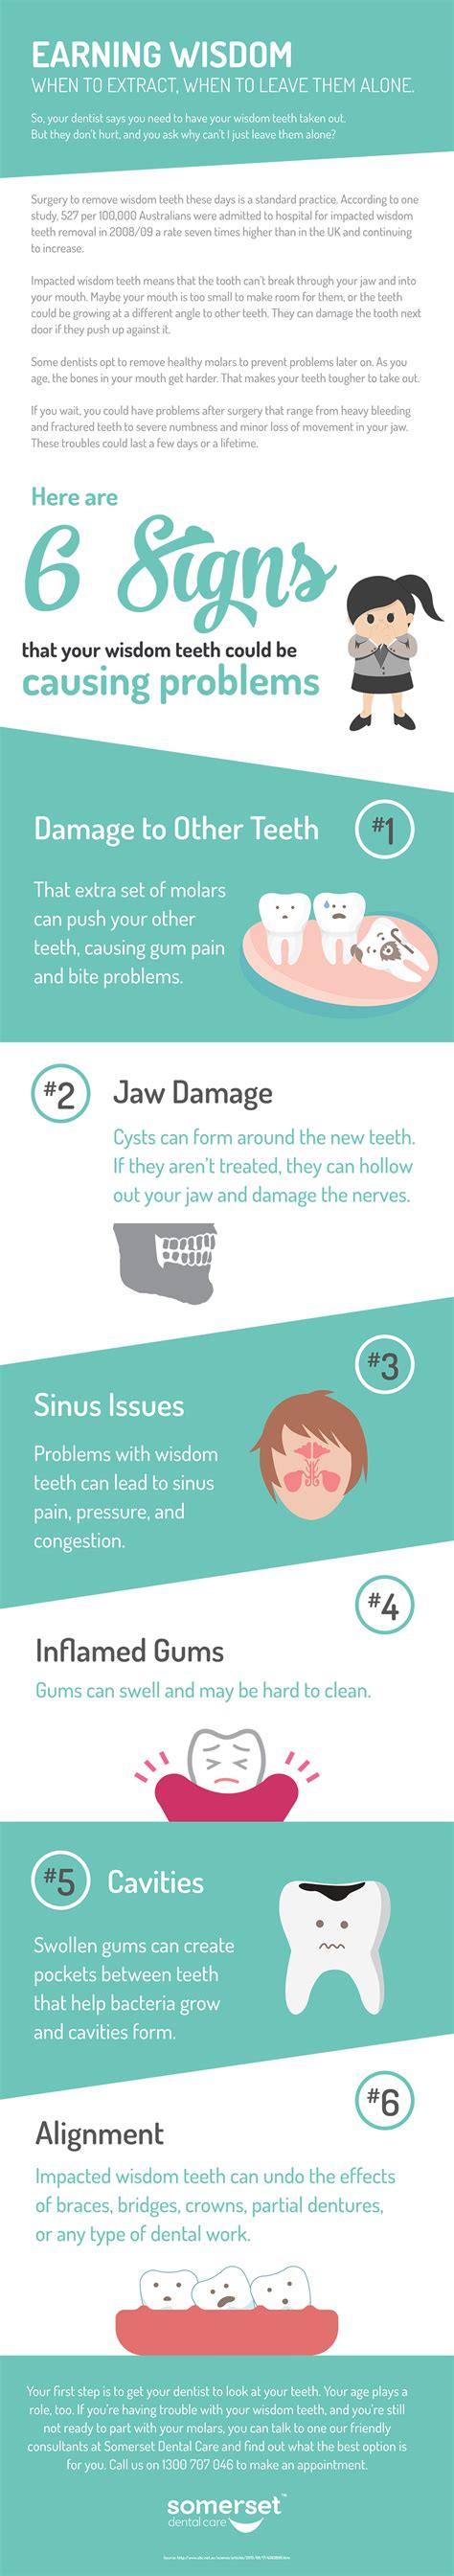 What is the oldest age to get wisdom teeth?